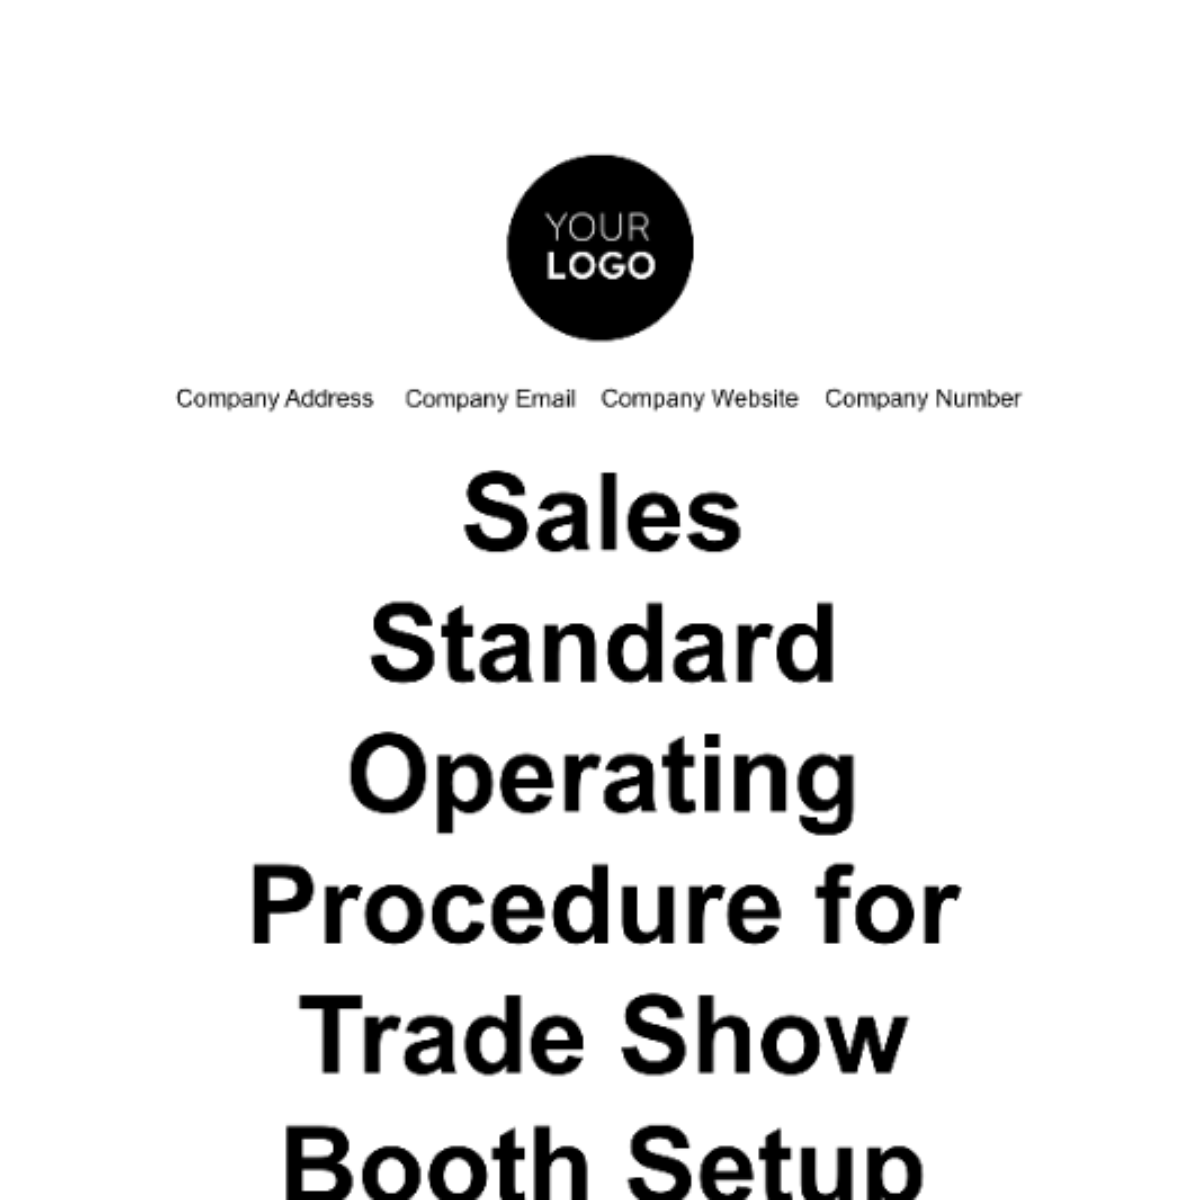 Free Sales Standard Operating Procedure for Trade Show Booth Setup Template